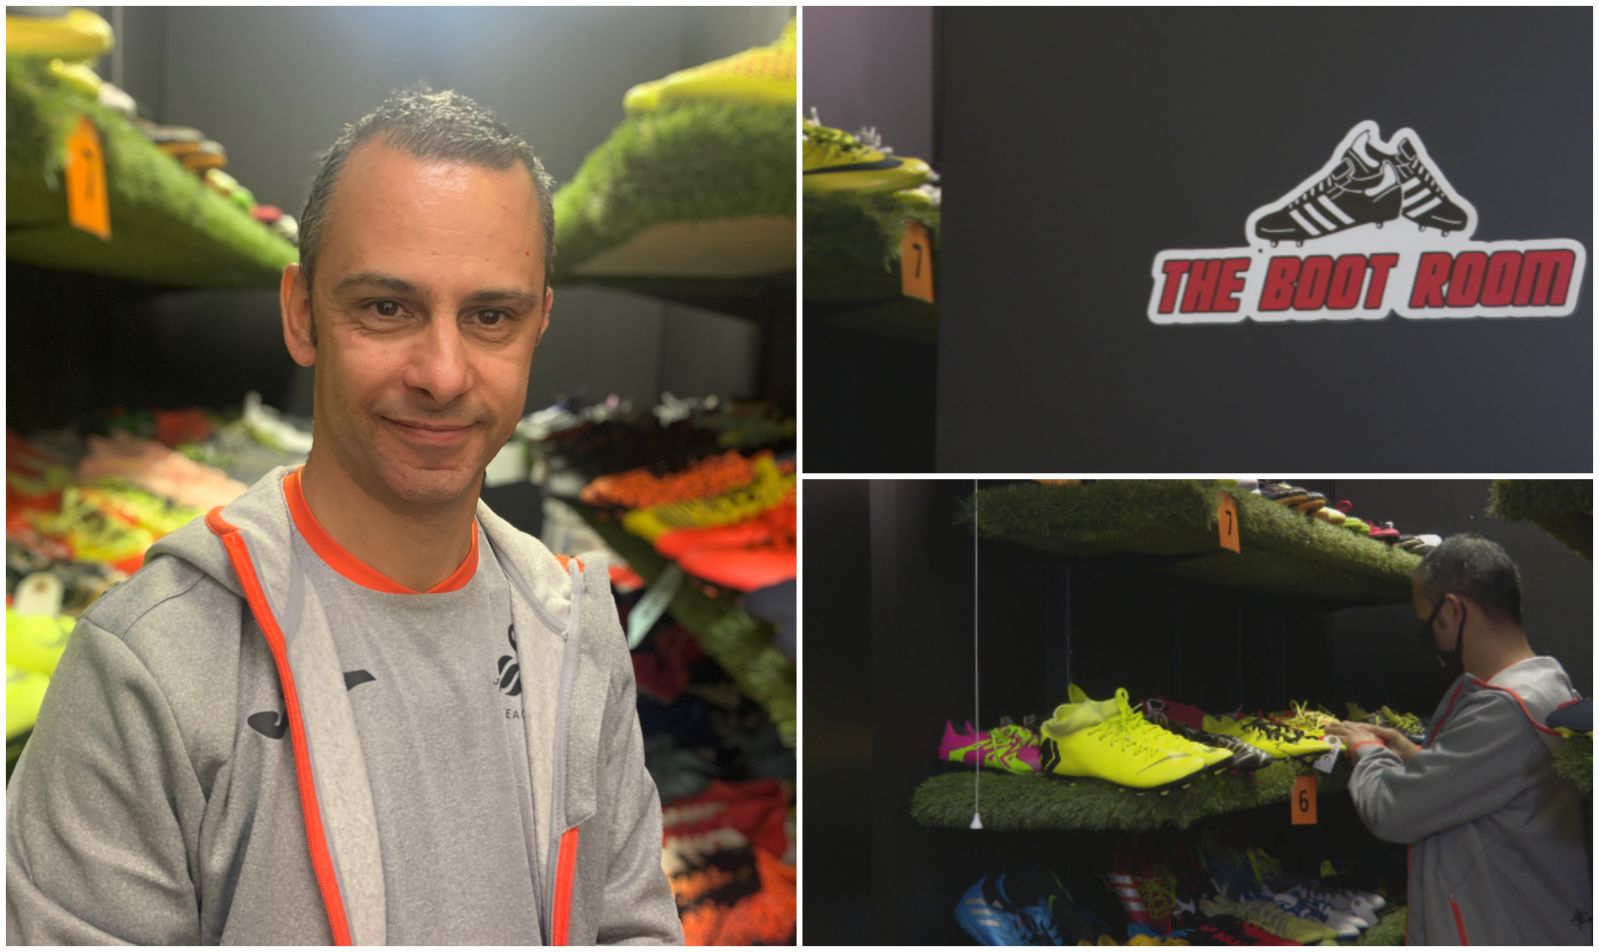 The father from Neath donating football boots to children who can't ...